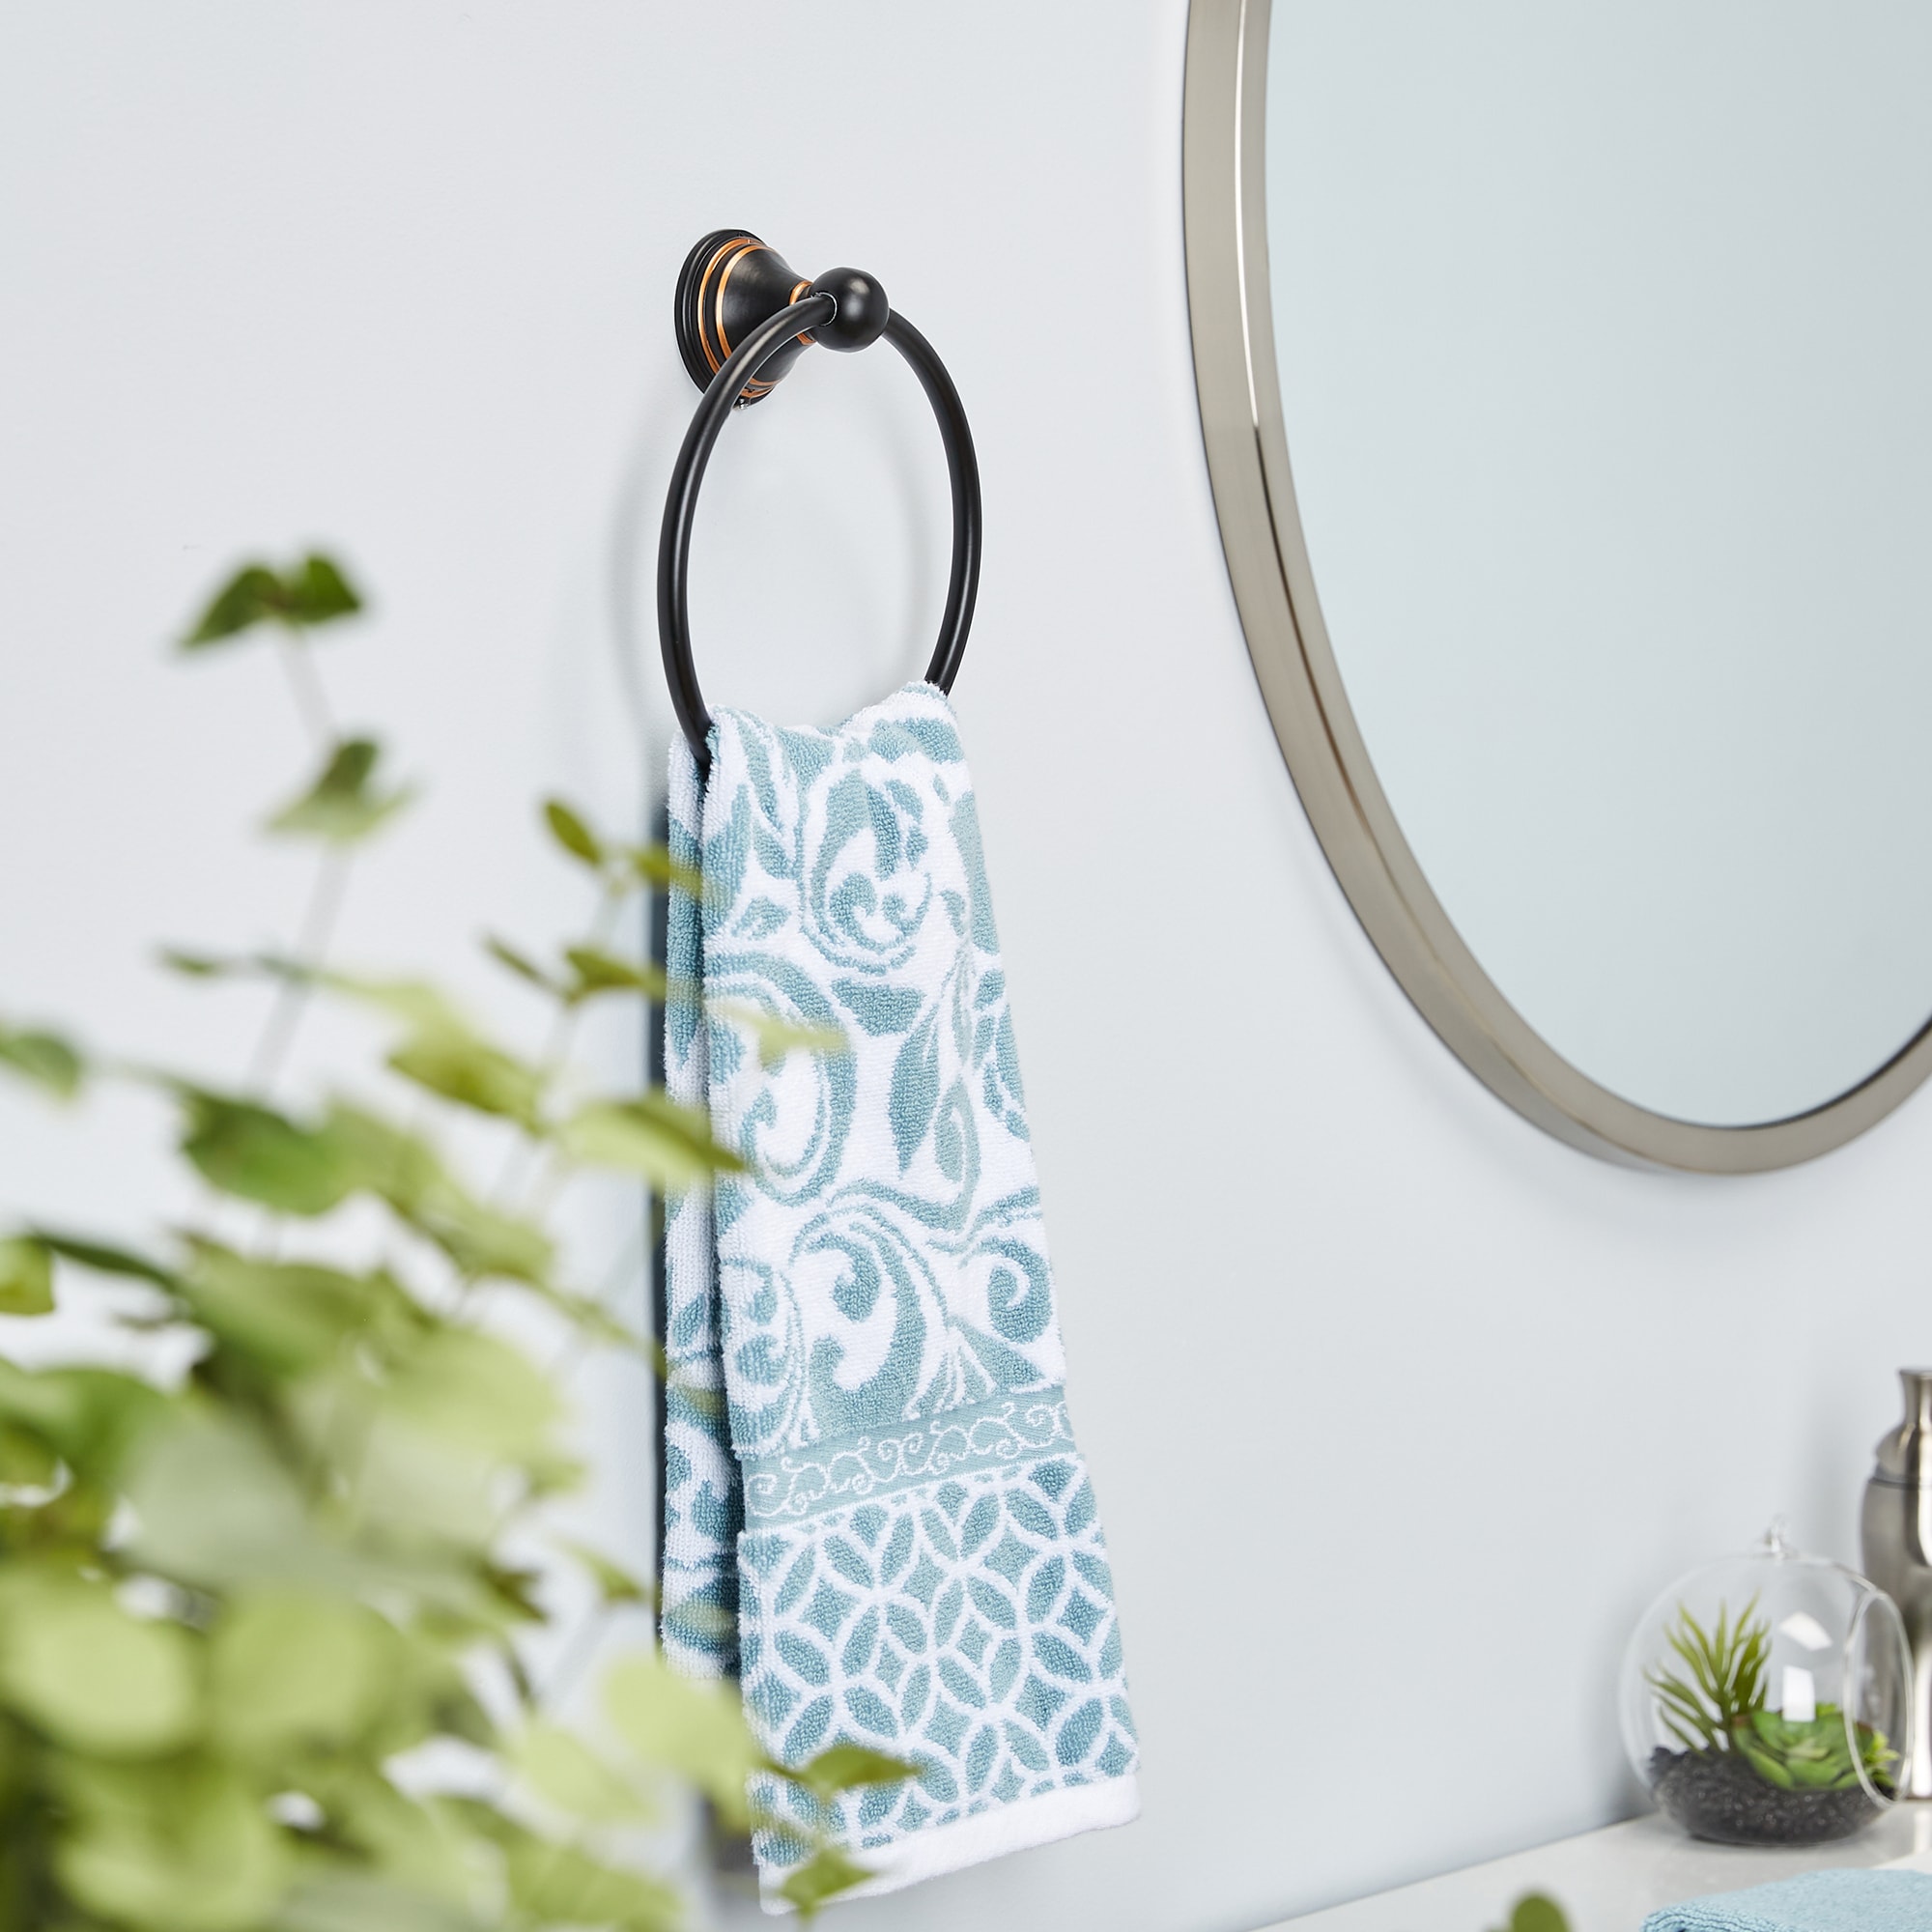 Where Should A Hand Towel Ring Be Placed | Storables